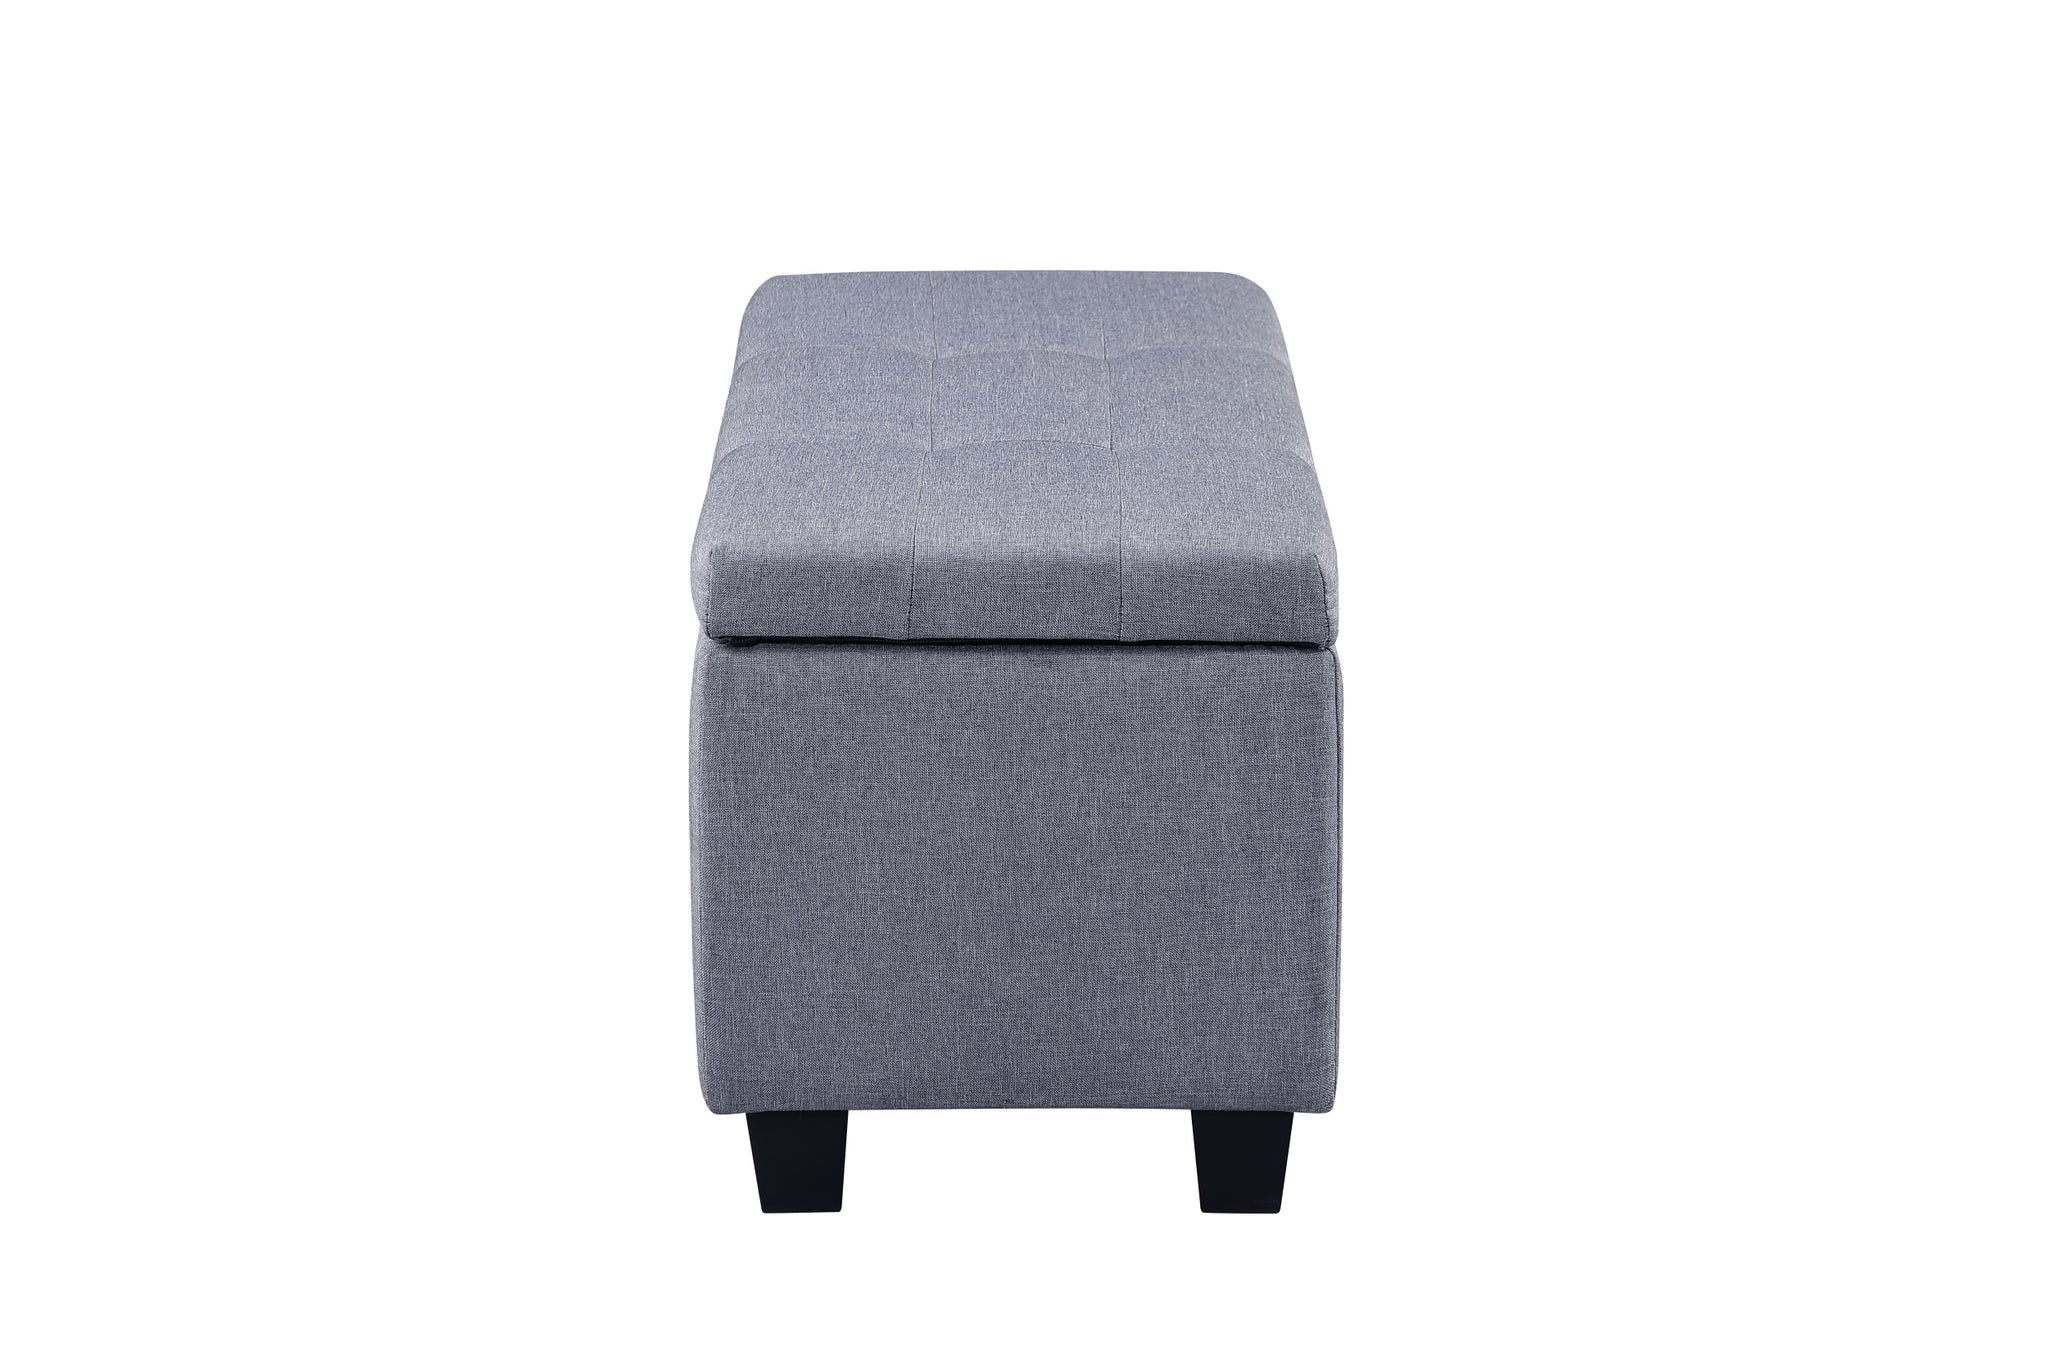 VIDEO Large Storage Ottoman Bench Set, 3 in 1 gray-fabric